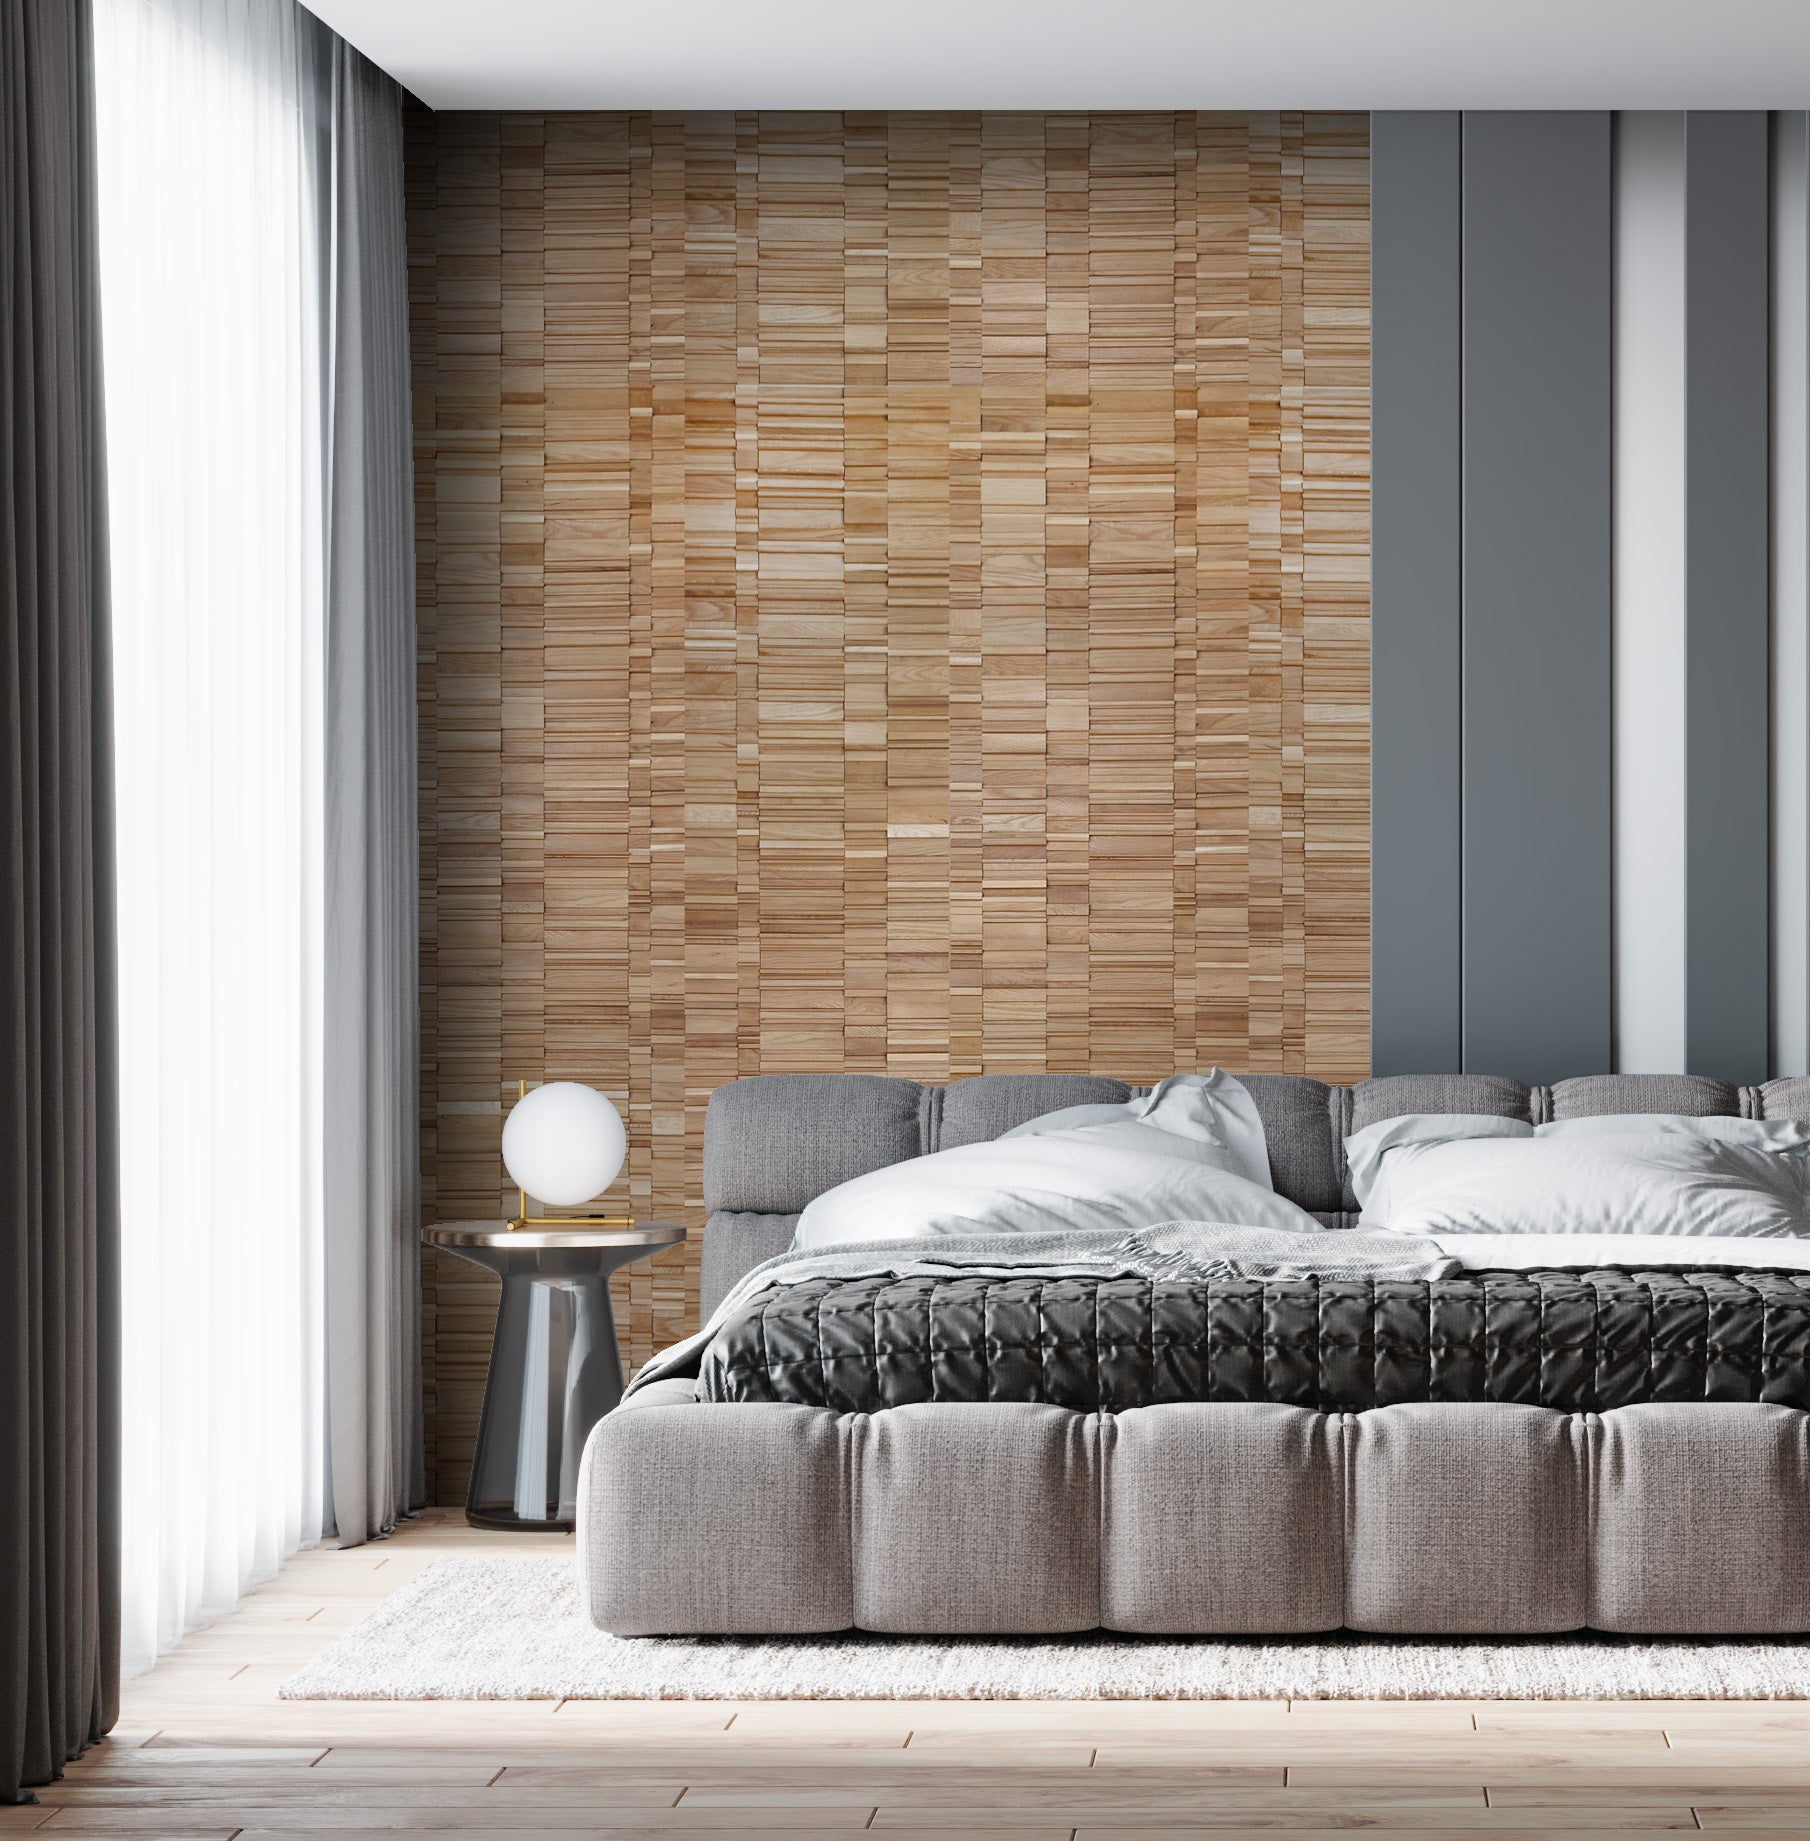 bedroom wall architectural wall tiles in oak